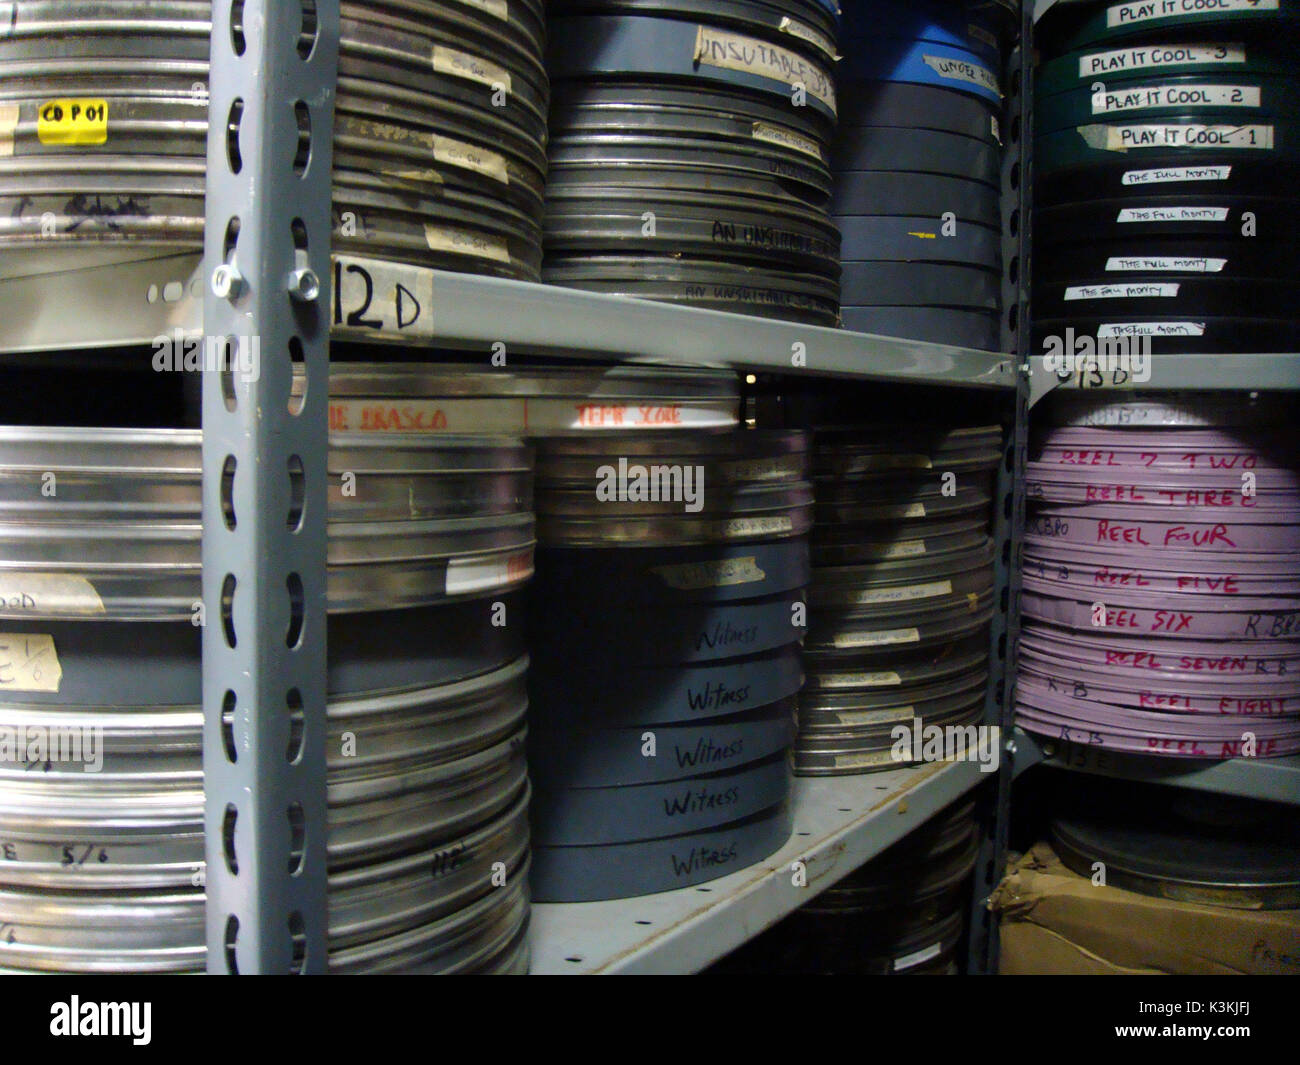 ARCHIVED FILM CANS at the Cinema Museum, London, July 2009 Stock Photo